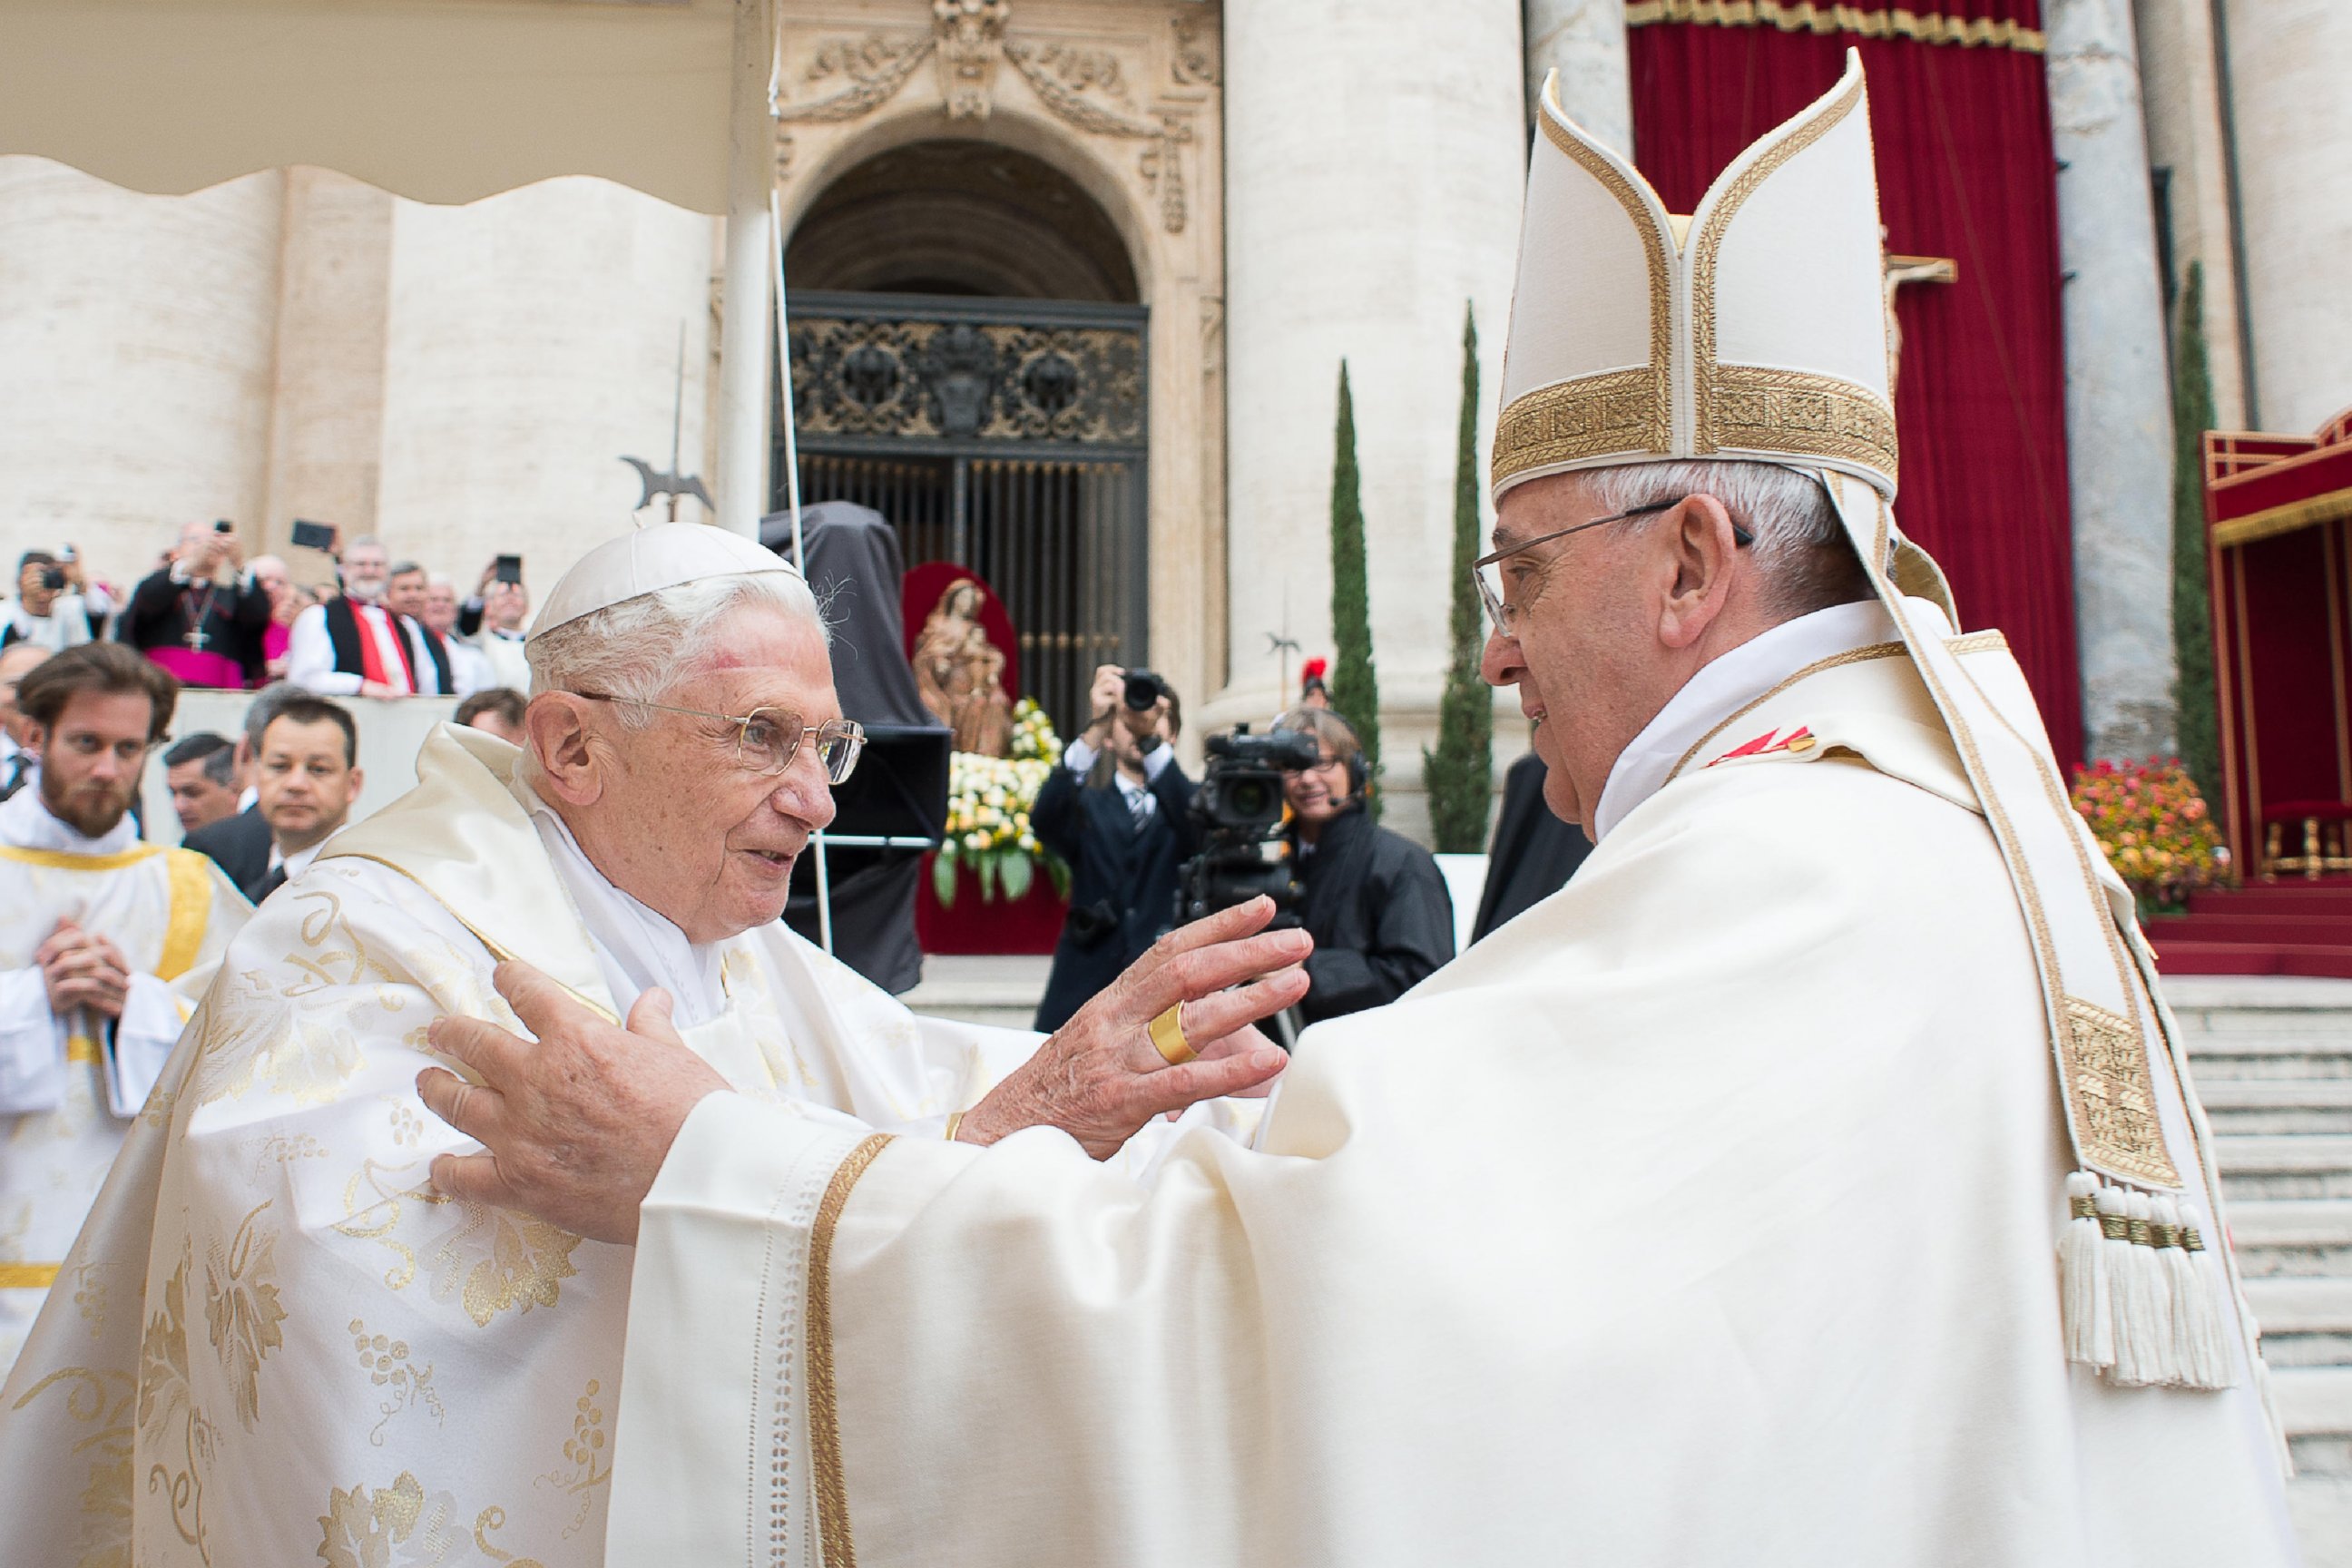 PHOTO: Pope Francis, right, embraces his predecessor Pope Emeritus Benedict XVI, during a ceremony in St. Peter's Square at the Vatican, Sunday, April 27, 2014.